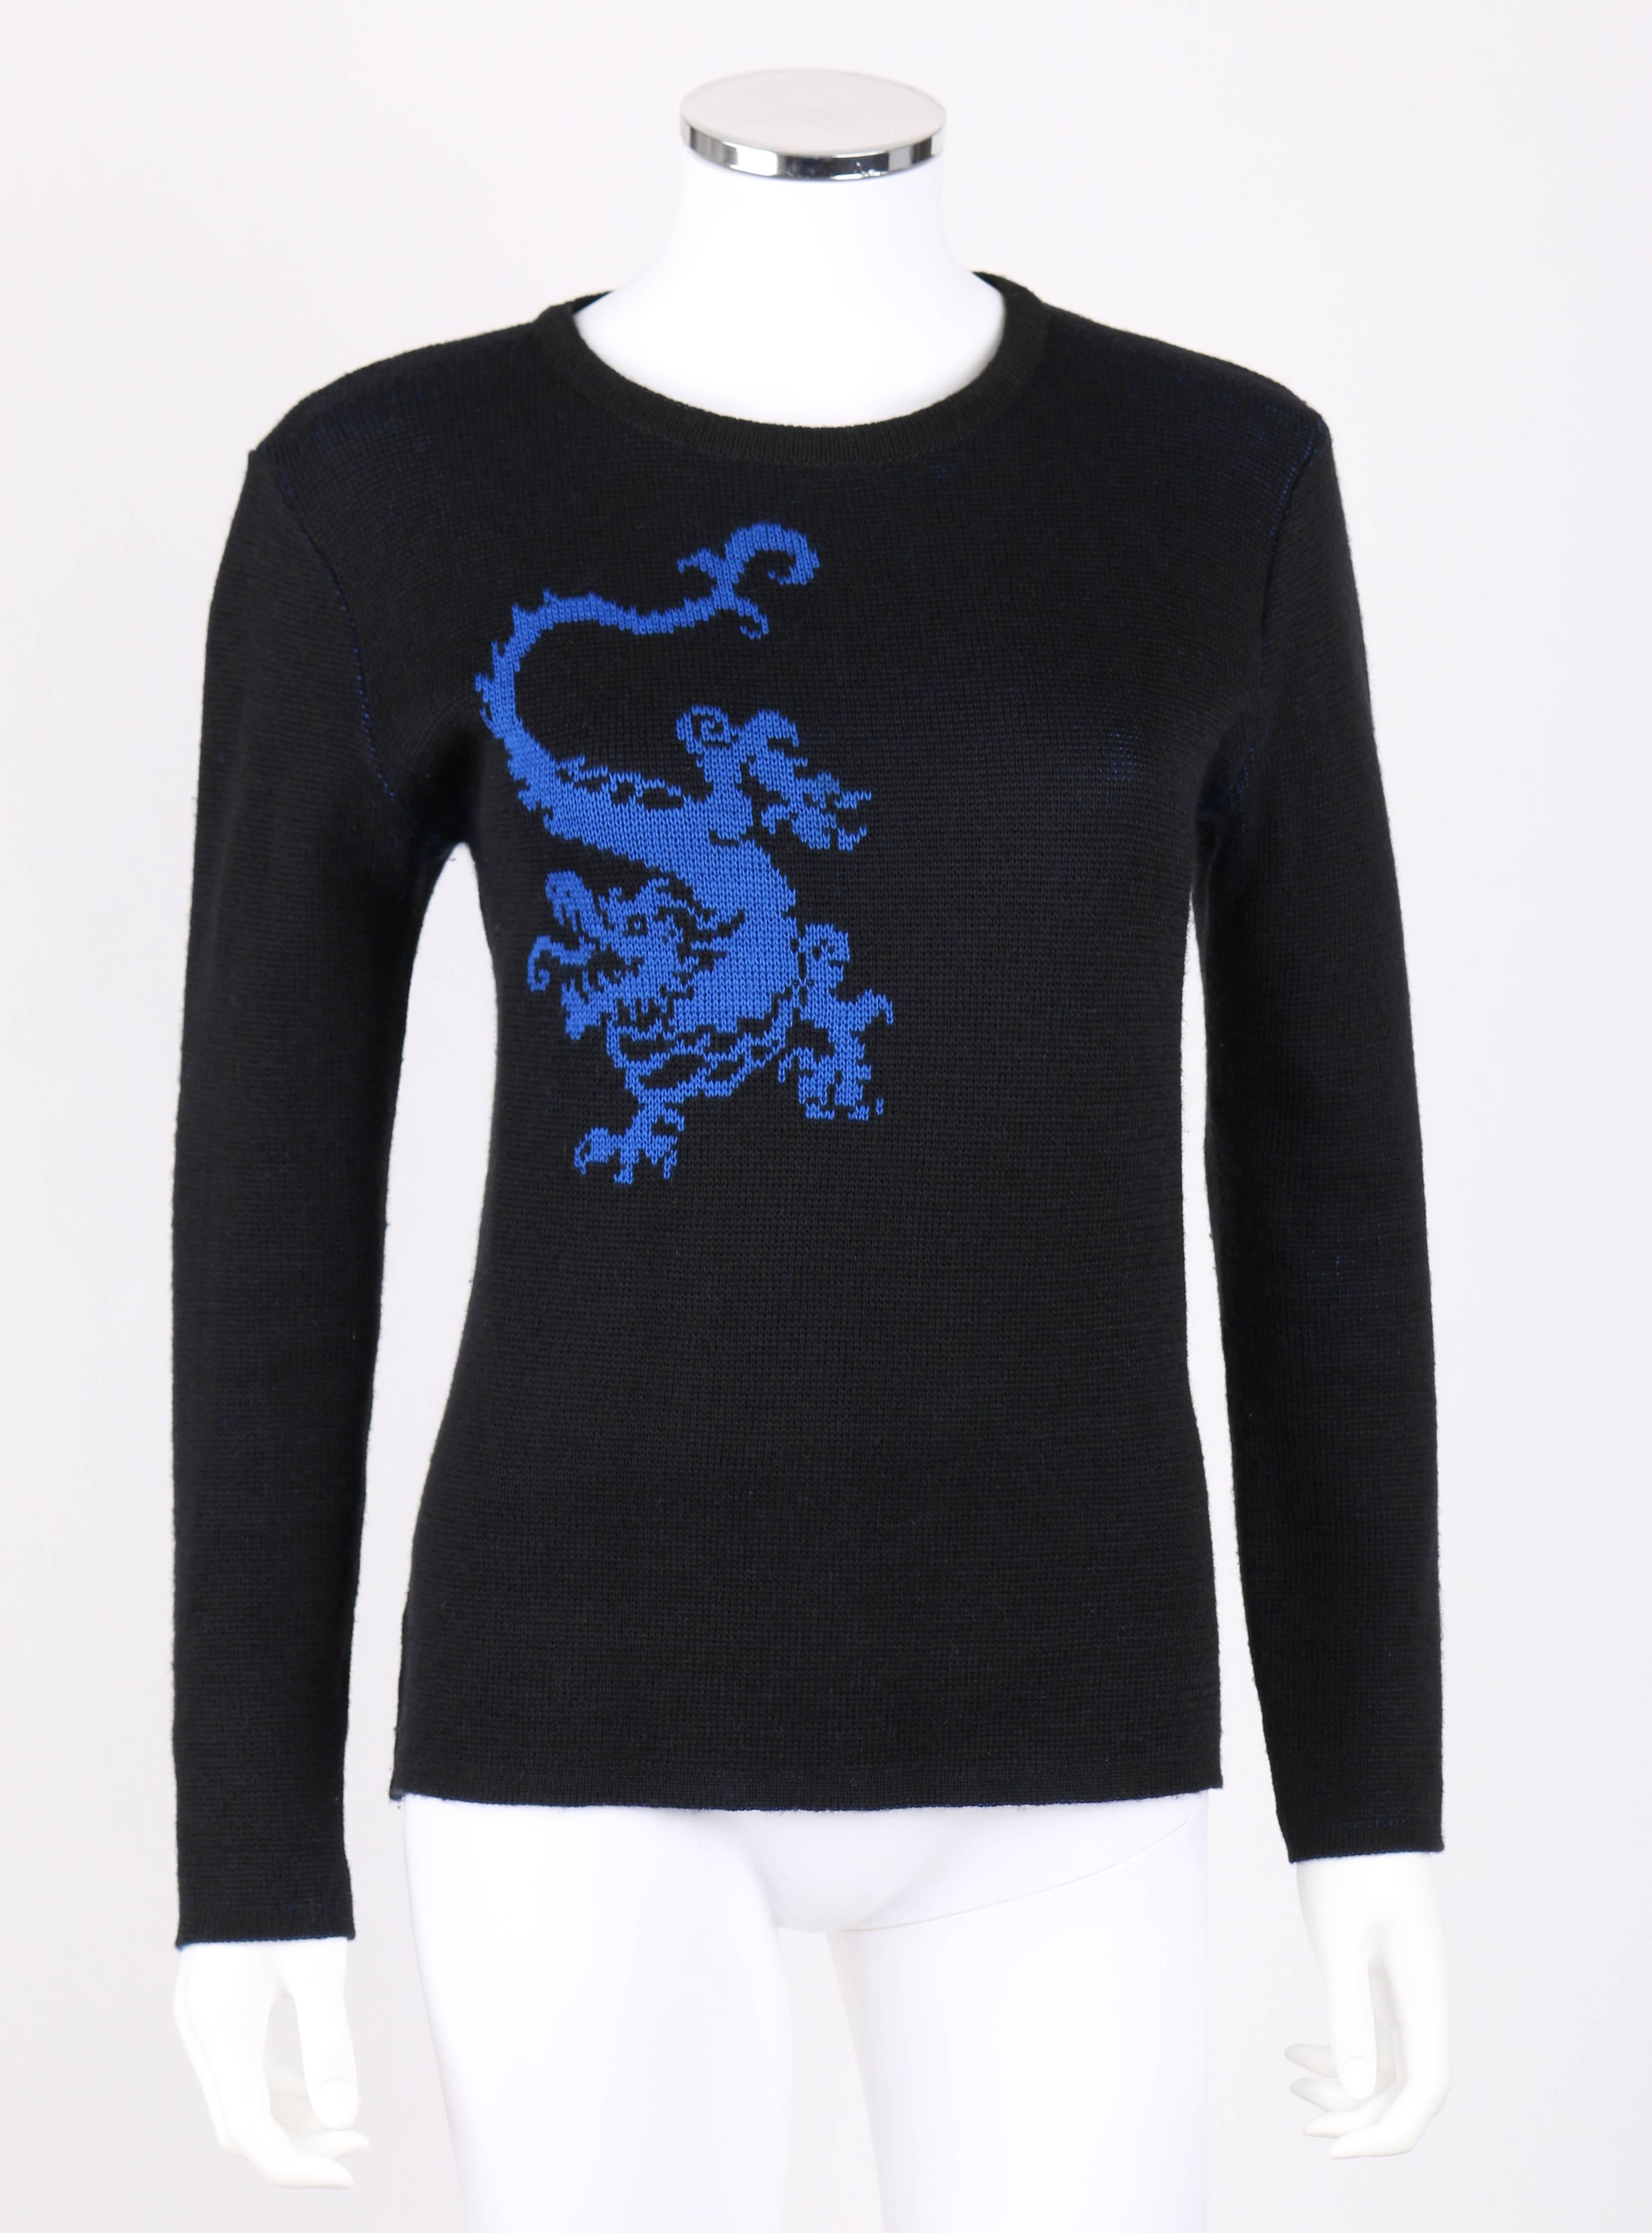 Vintage Yves Saint Laurent c.1980's black / blue 100% wool knitwear Chinese dragon design sweater. Black and blue double knit. Long sleeves. Scoop neckline. Rib-knit collar, cuffs, and hem. Pullover style. Marked Fabric Content: 